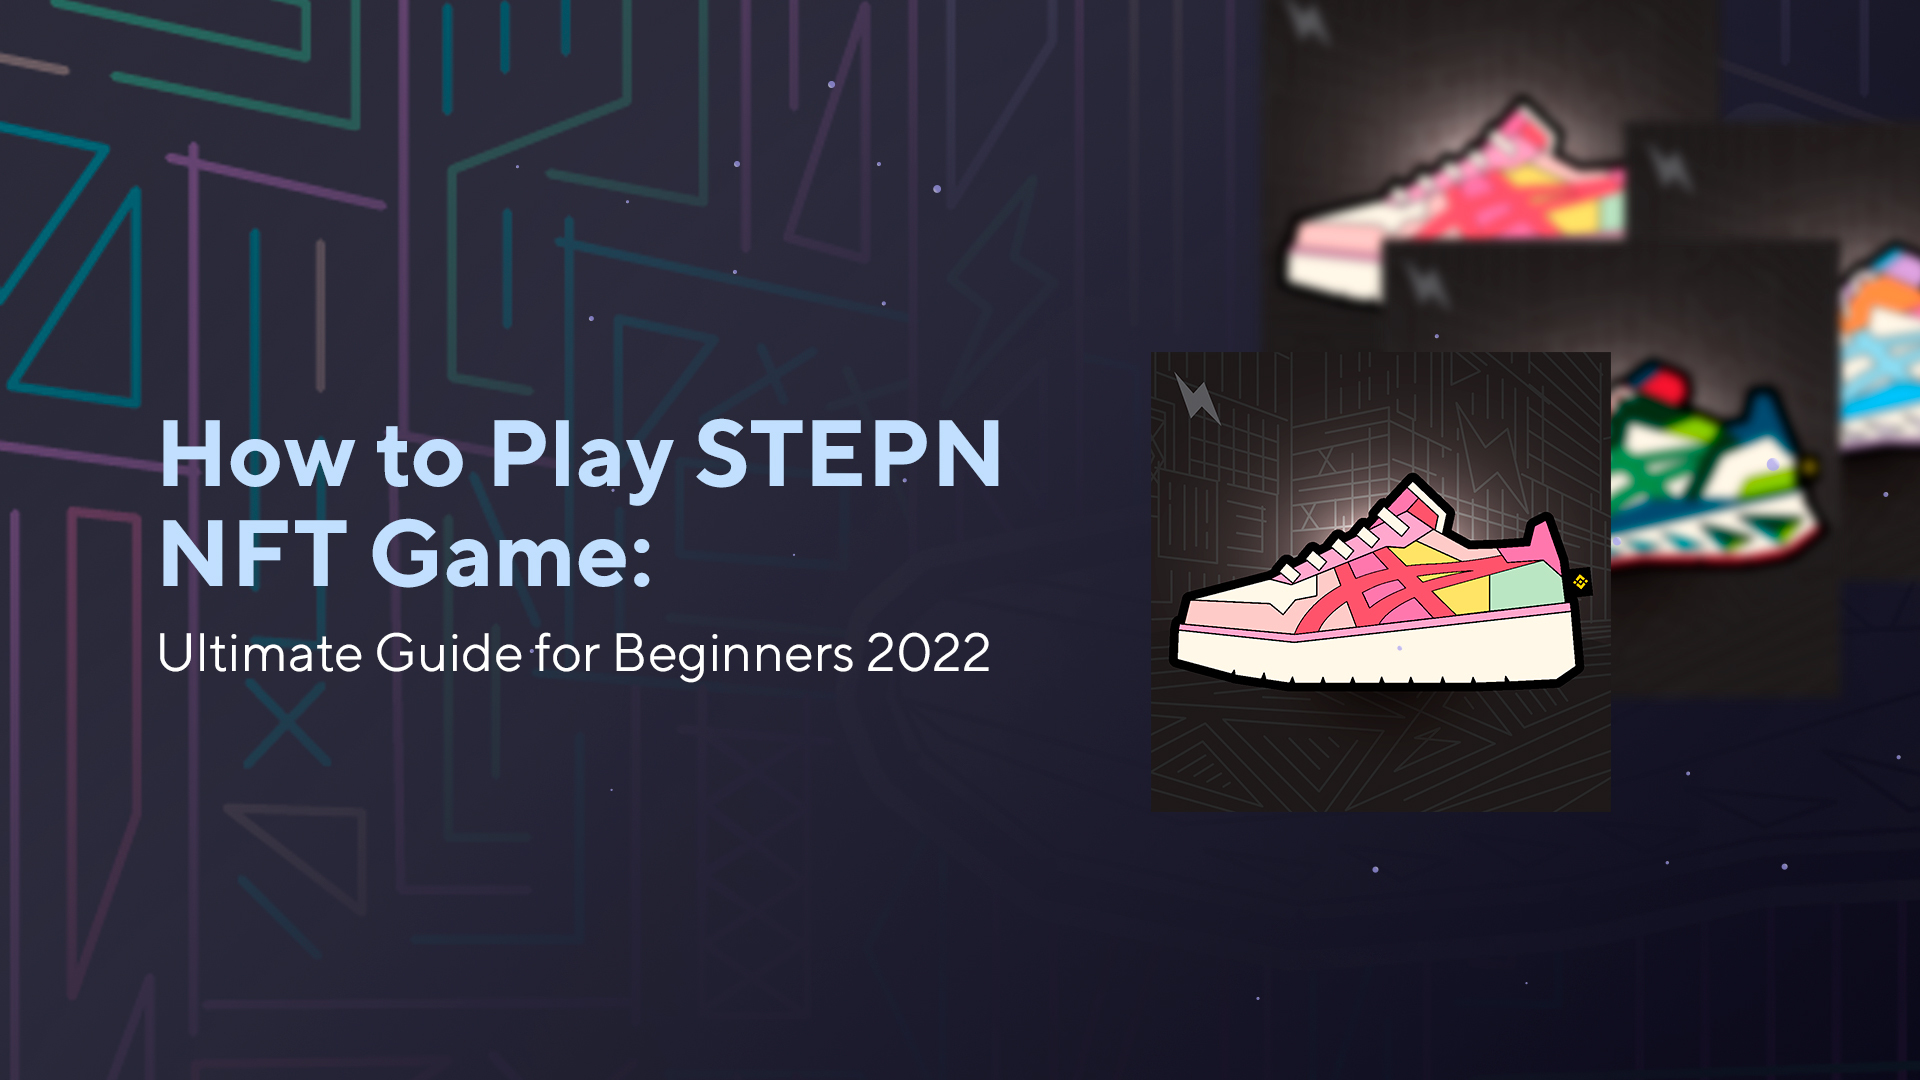 How to Play STEPN NFT Game: Ultimate Guide for Beginners 2022